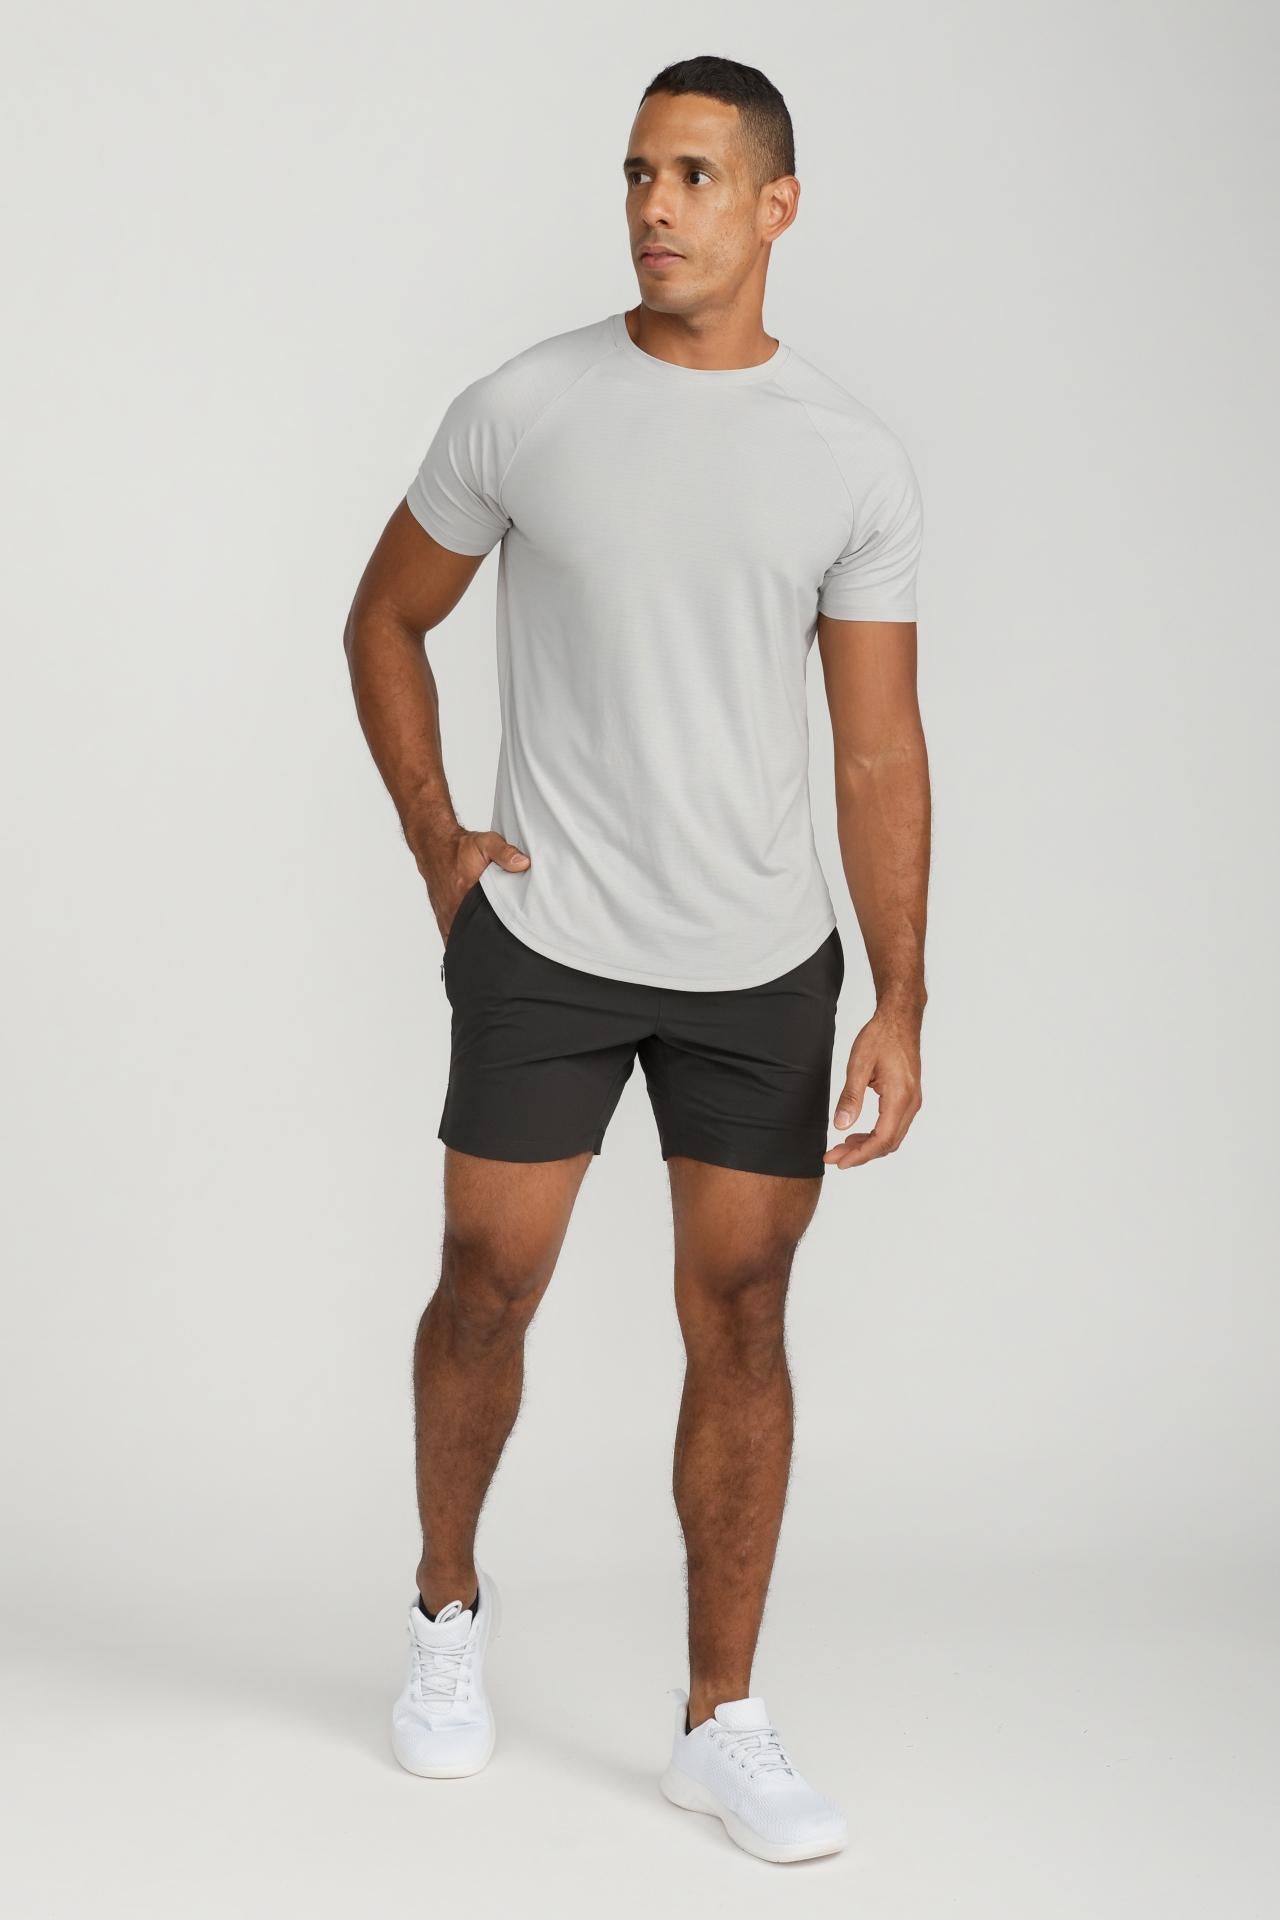 Men's Shirts | Southern Athletica